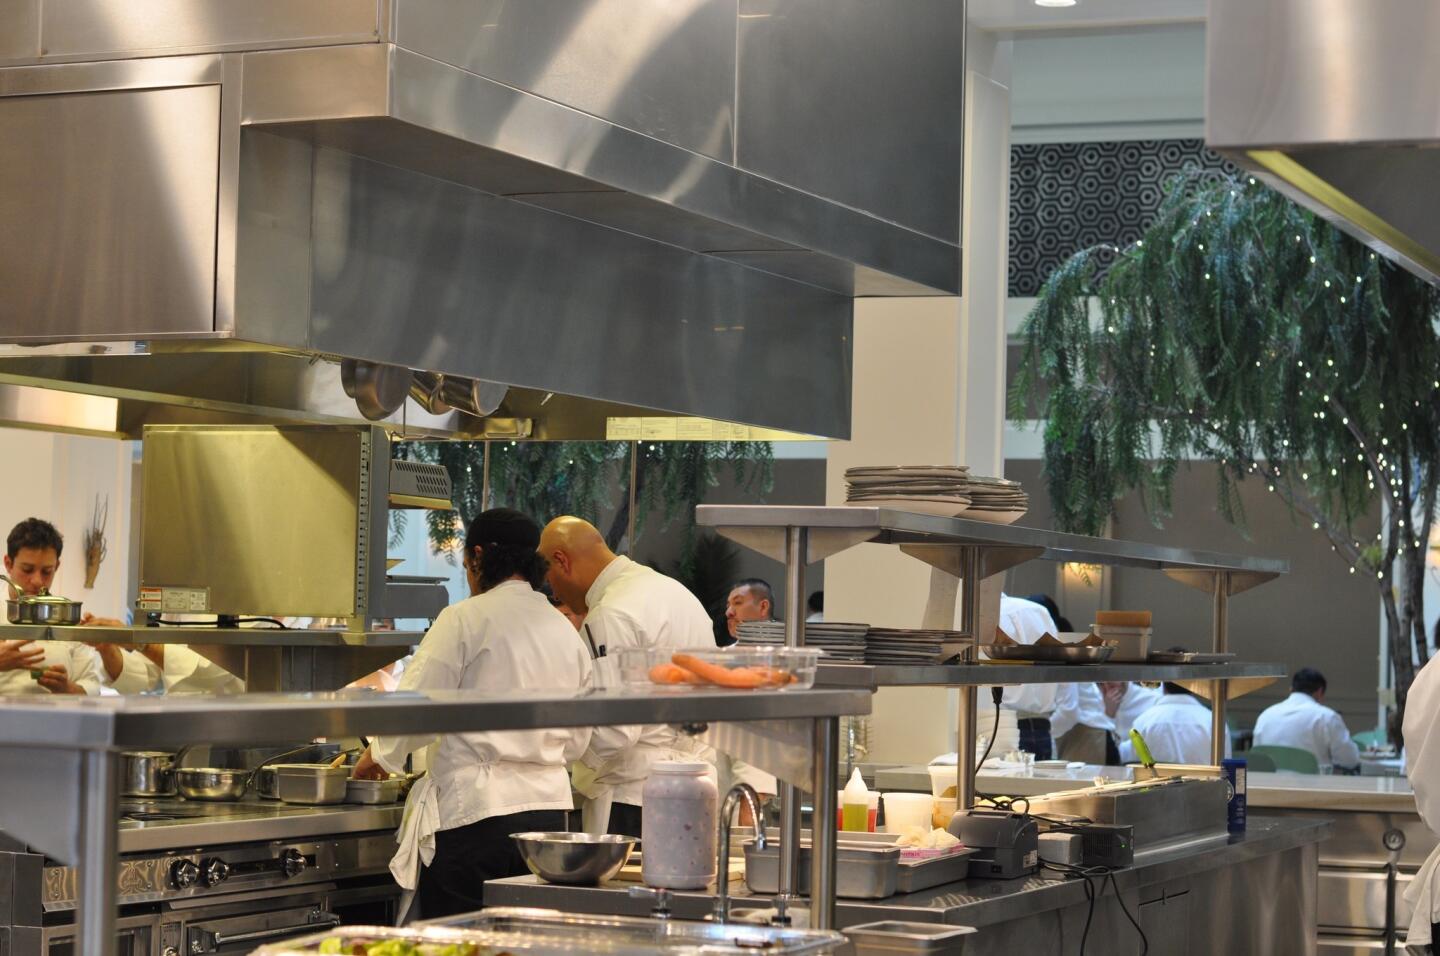 The open kitchen at Spring, though which you can see the tree-flled atrium and dining room.